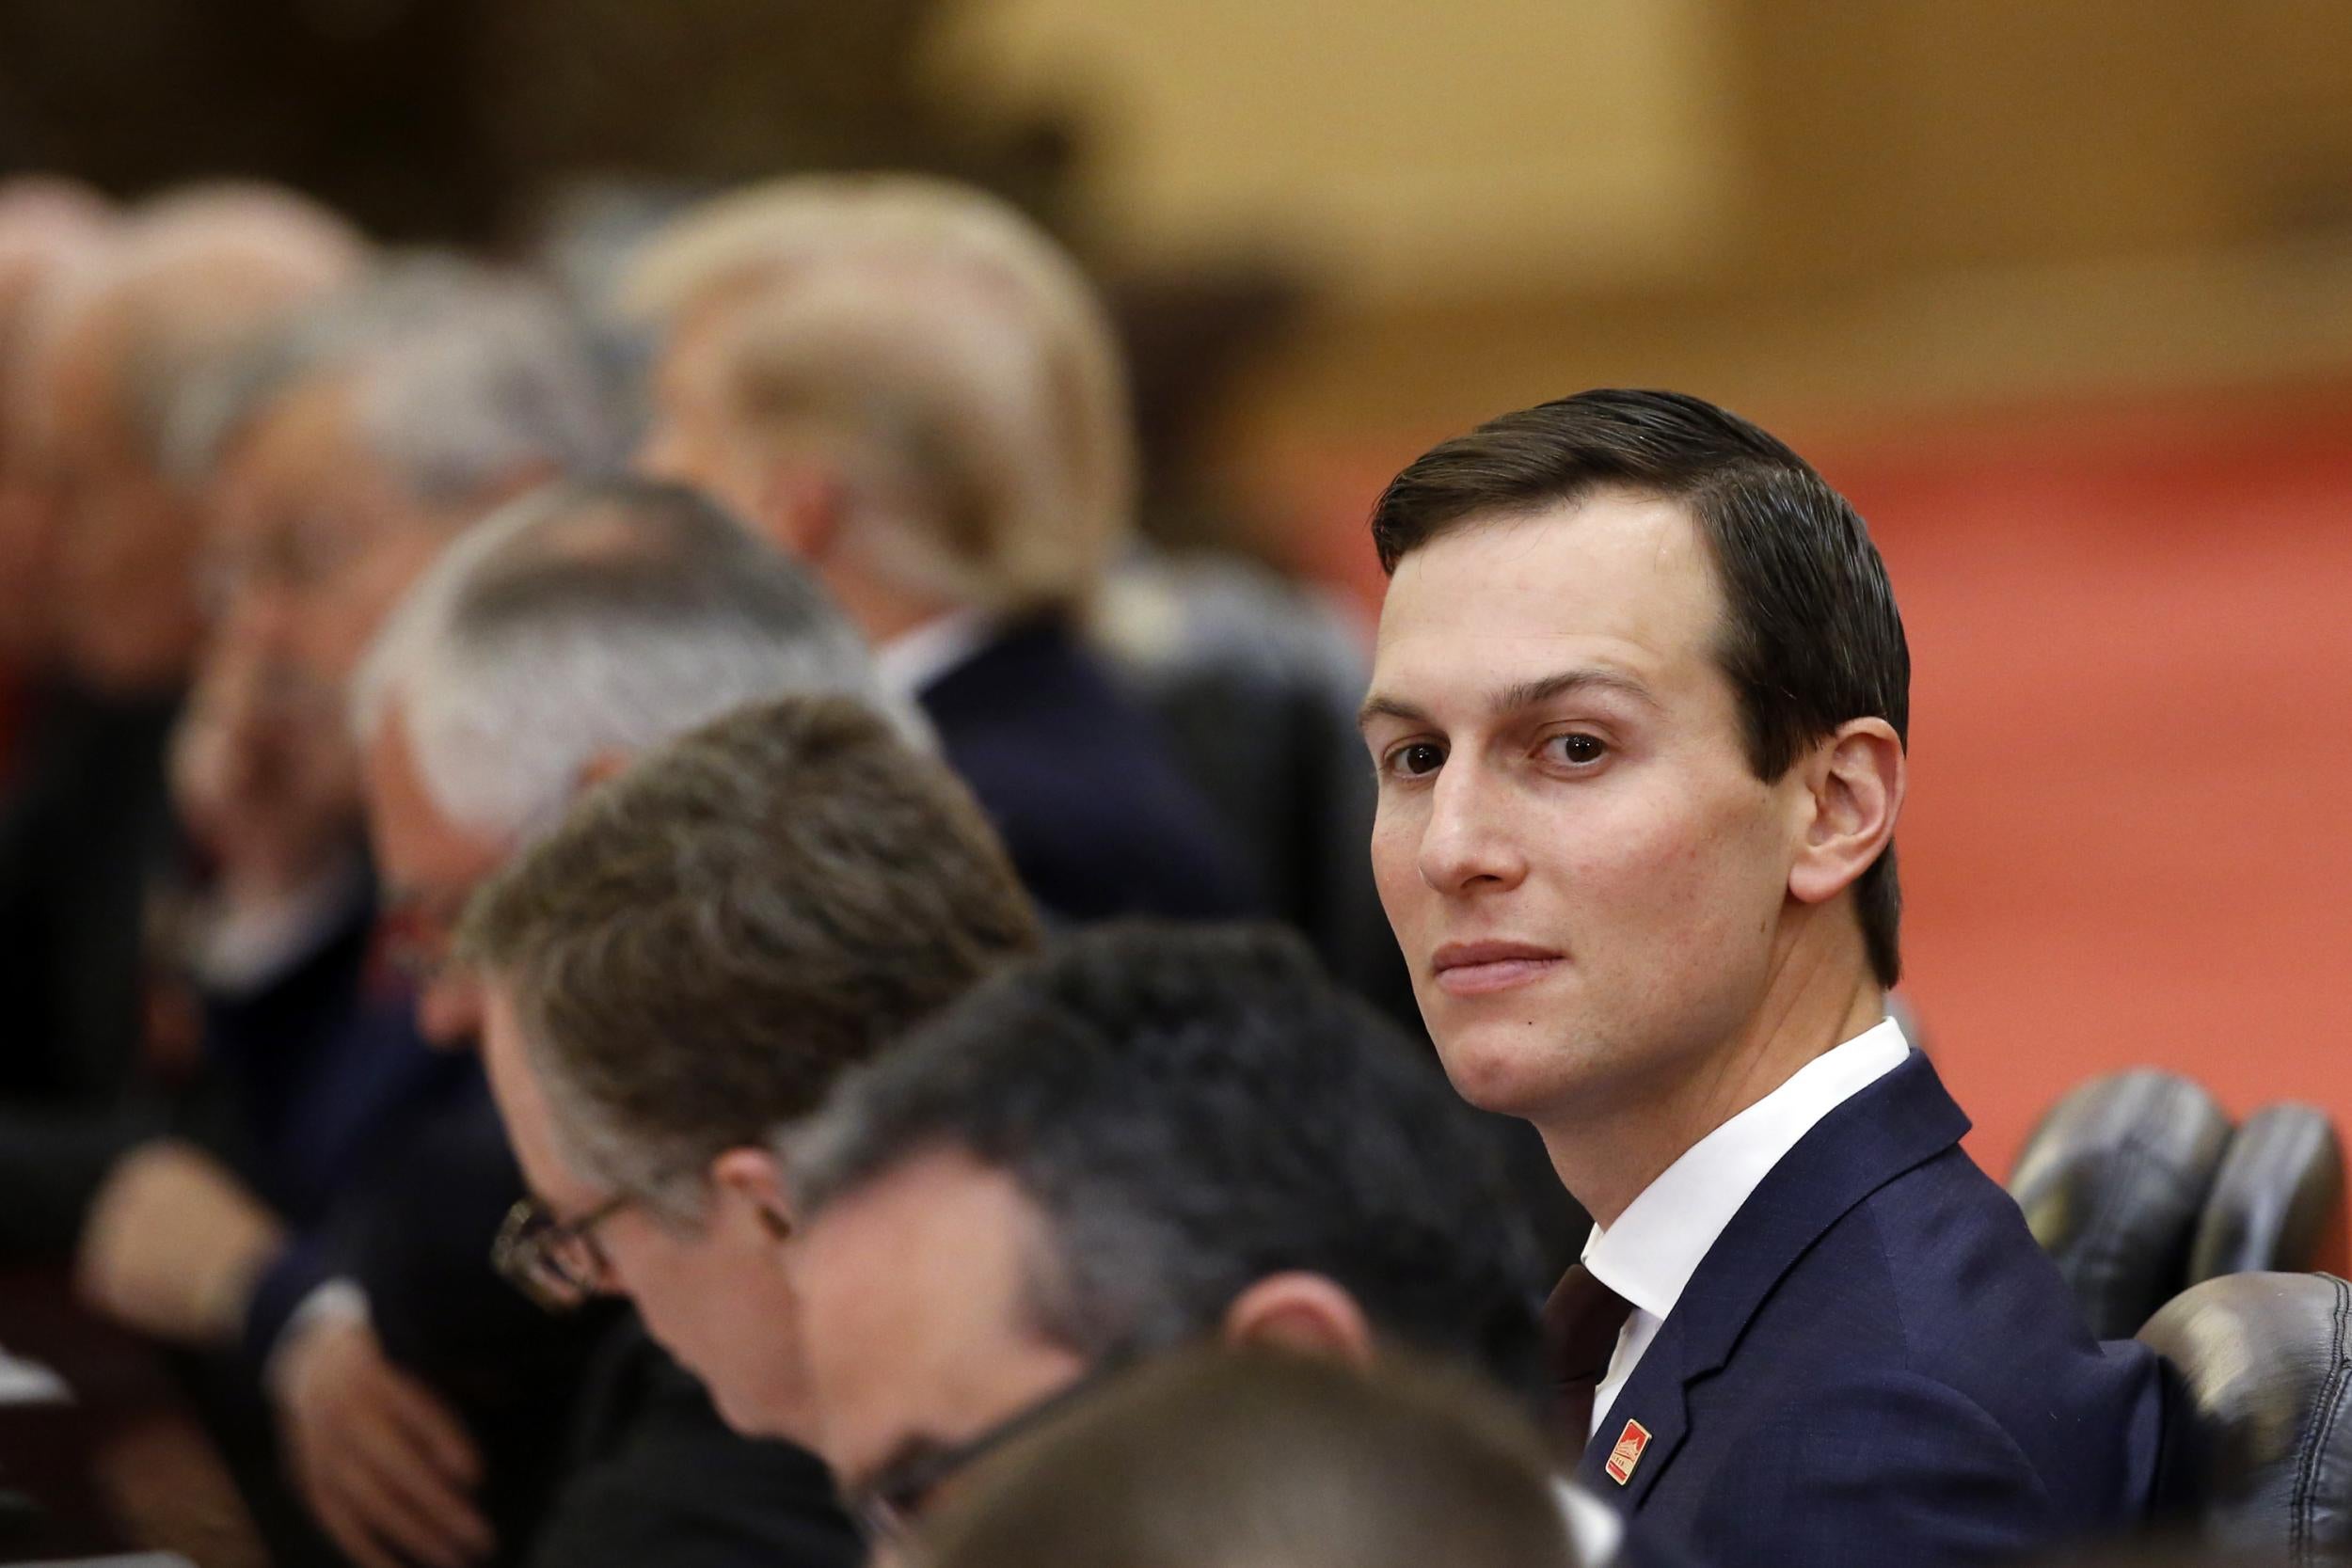 Kushner remains a beneficiary of trusts that have stakes in Kushner Companies, even though he resigned as chief executive in January of last year